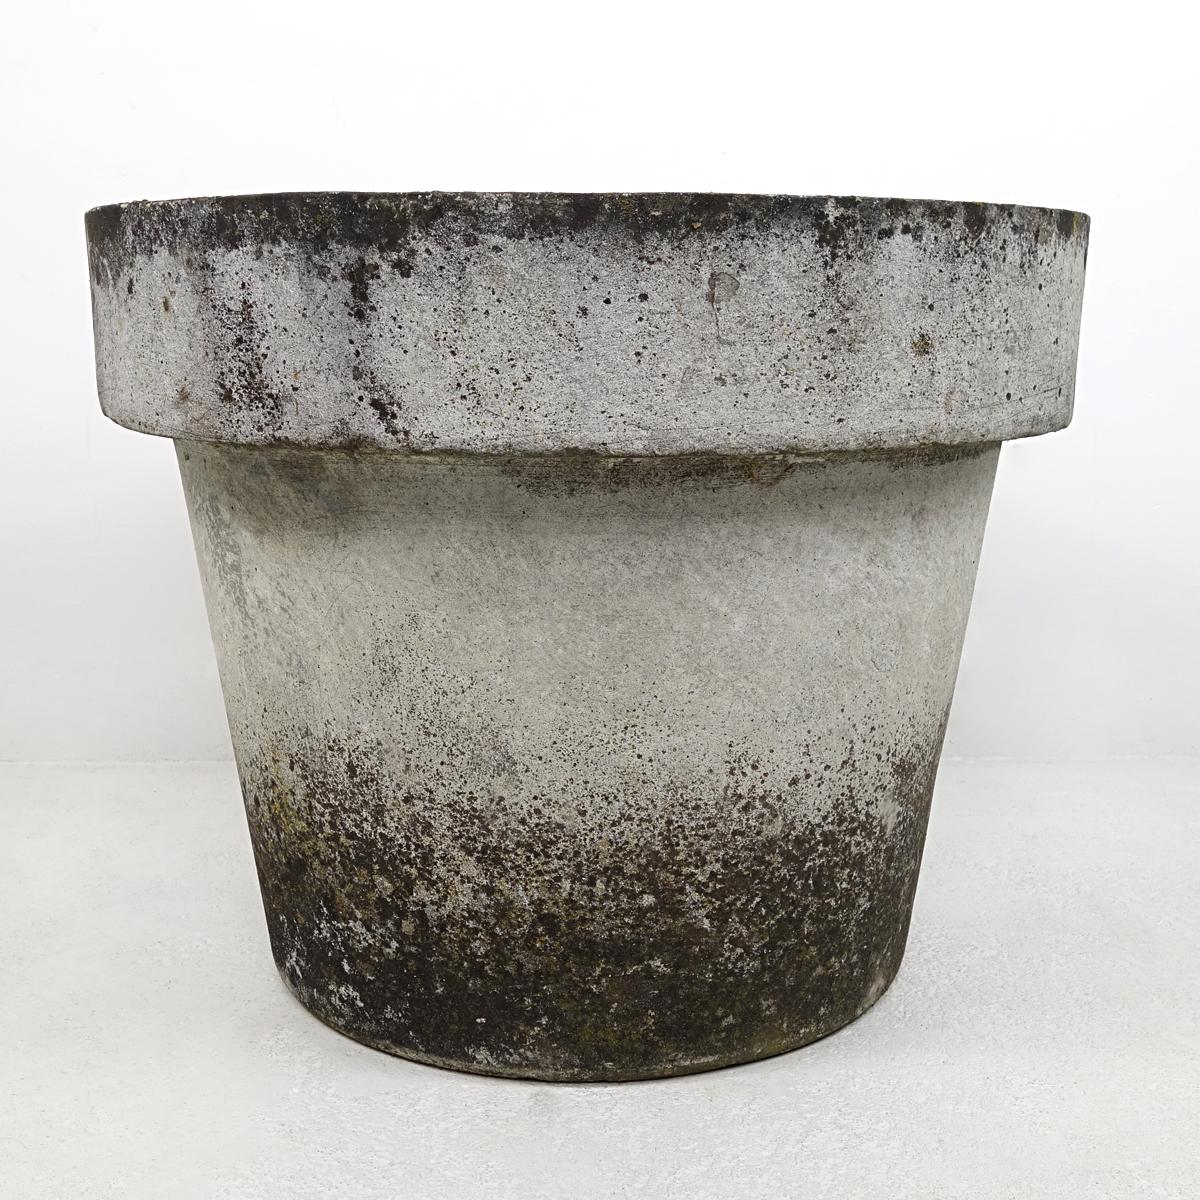 Large planter designed by famous Swiss artist, designer and architect Willy Guhl. The planter has the archetypical shape of flower pots, but is much larger. It is 40 cm (15.75 in) high and has a diameter of 50 cm (19.7 in). With its beautiful patina